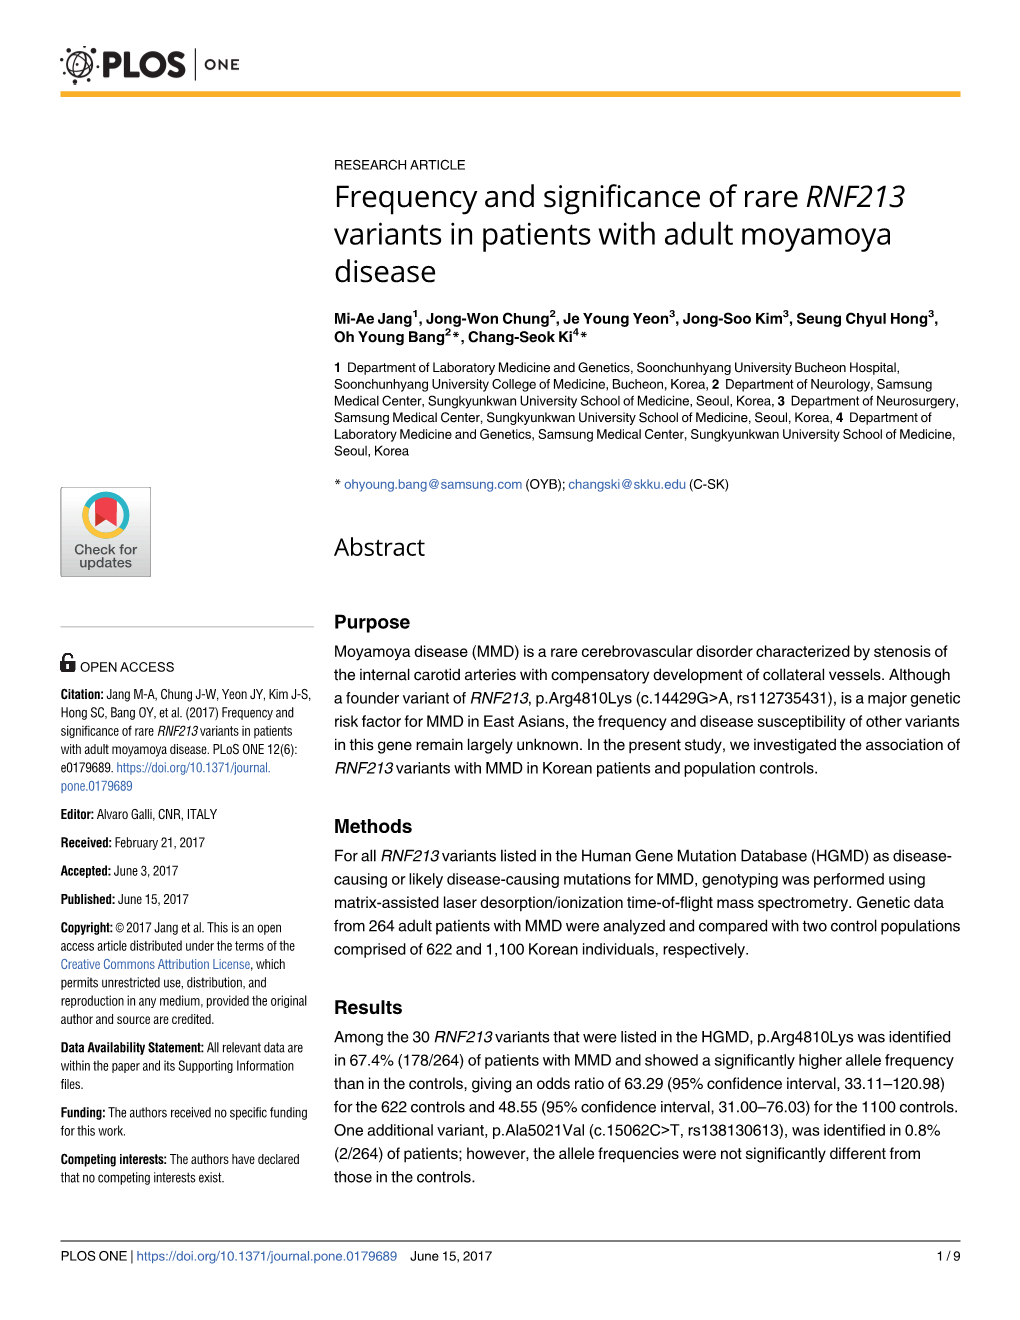 Frequency and Significance of Rare RNF213 Variants in Patients with Adult Moyamoya Disease